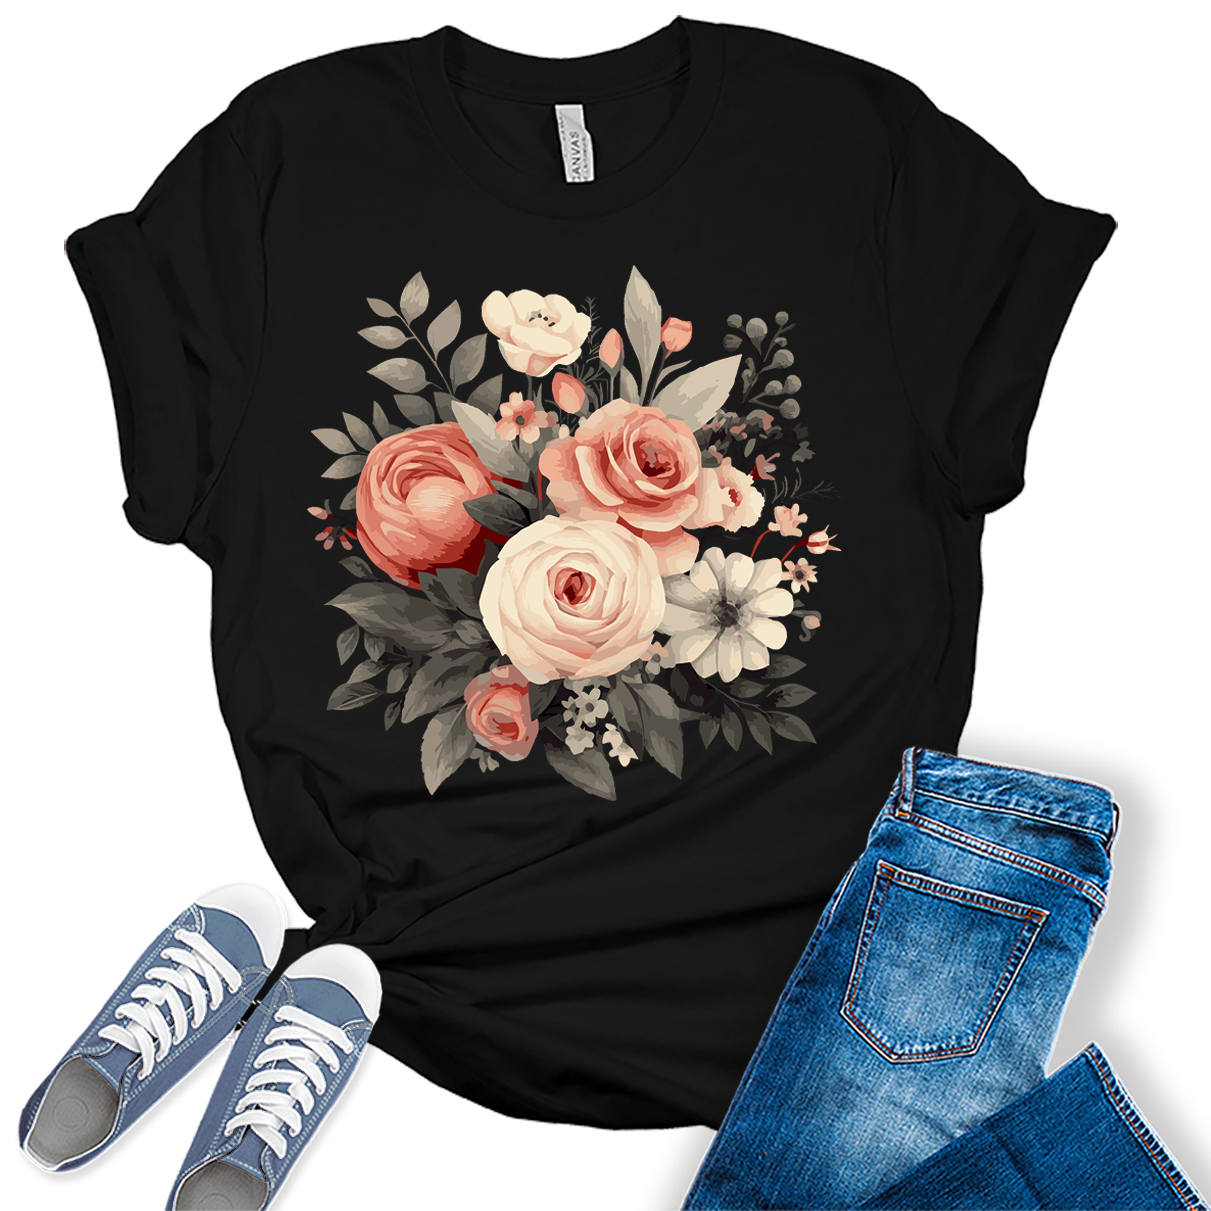 Trendy Vintage Fall Floral Graphic Tees for Women Fall Shirts